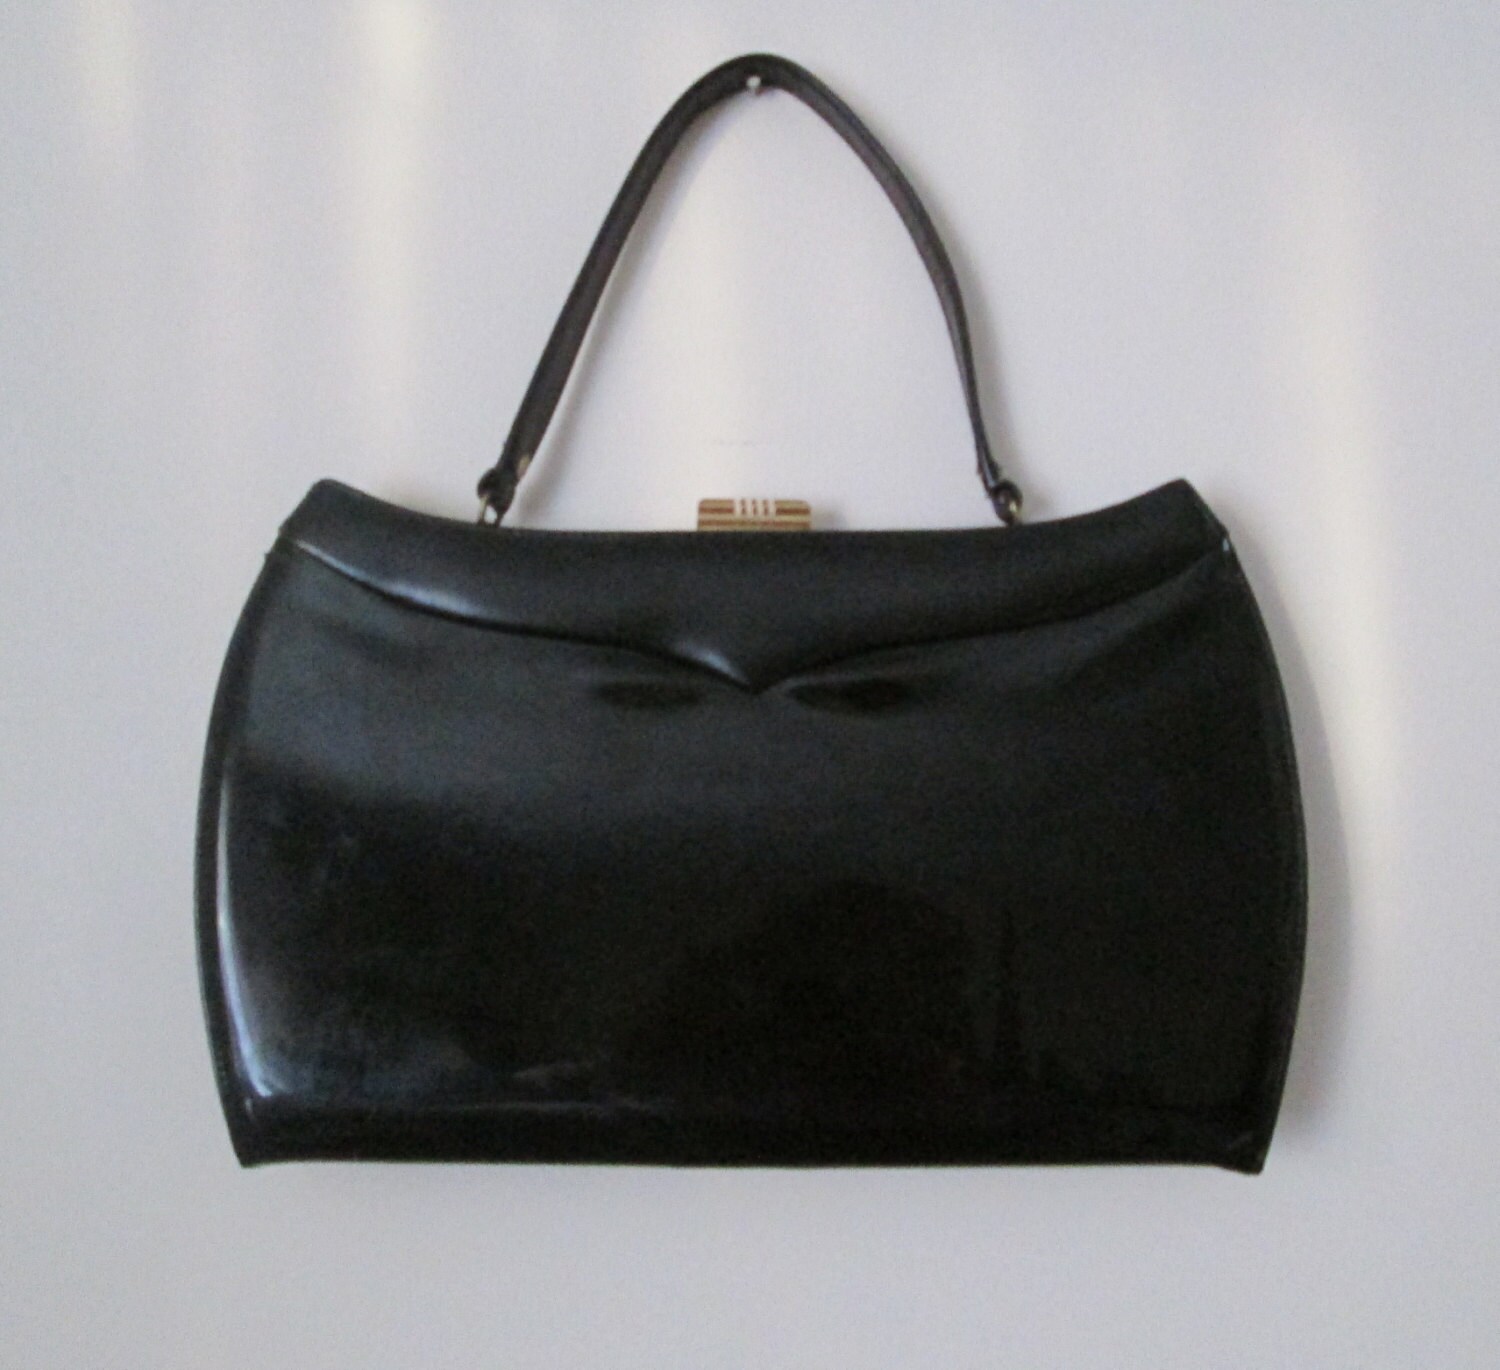 Vintage Black Patent Faux Leather Purse Structured by MrsDinkerson